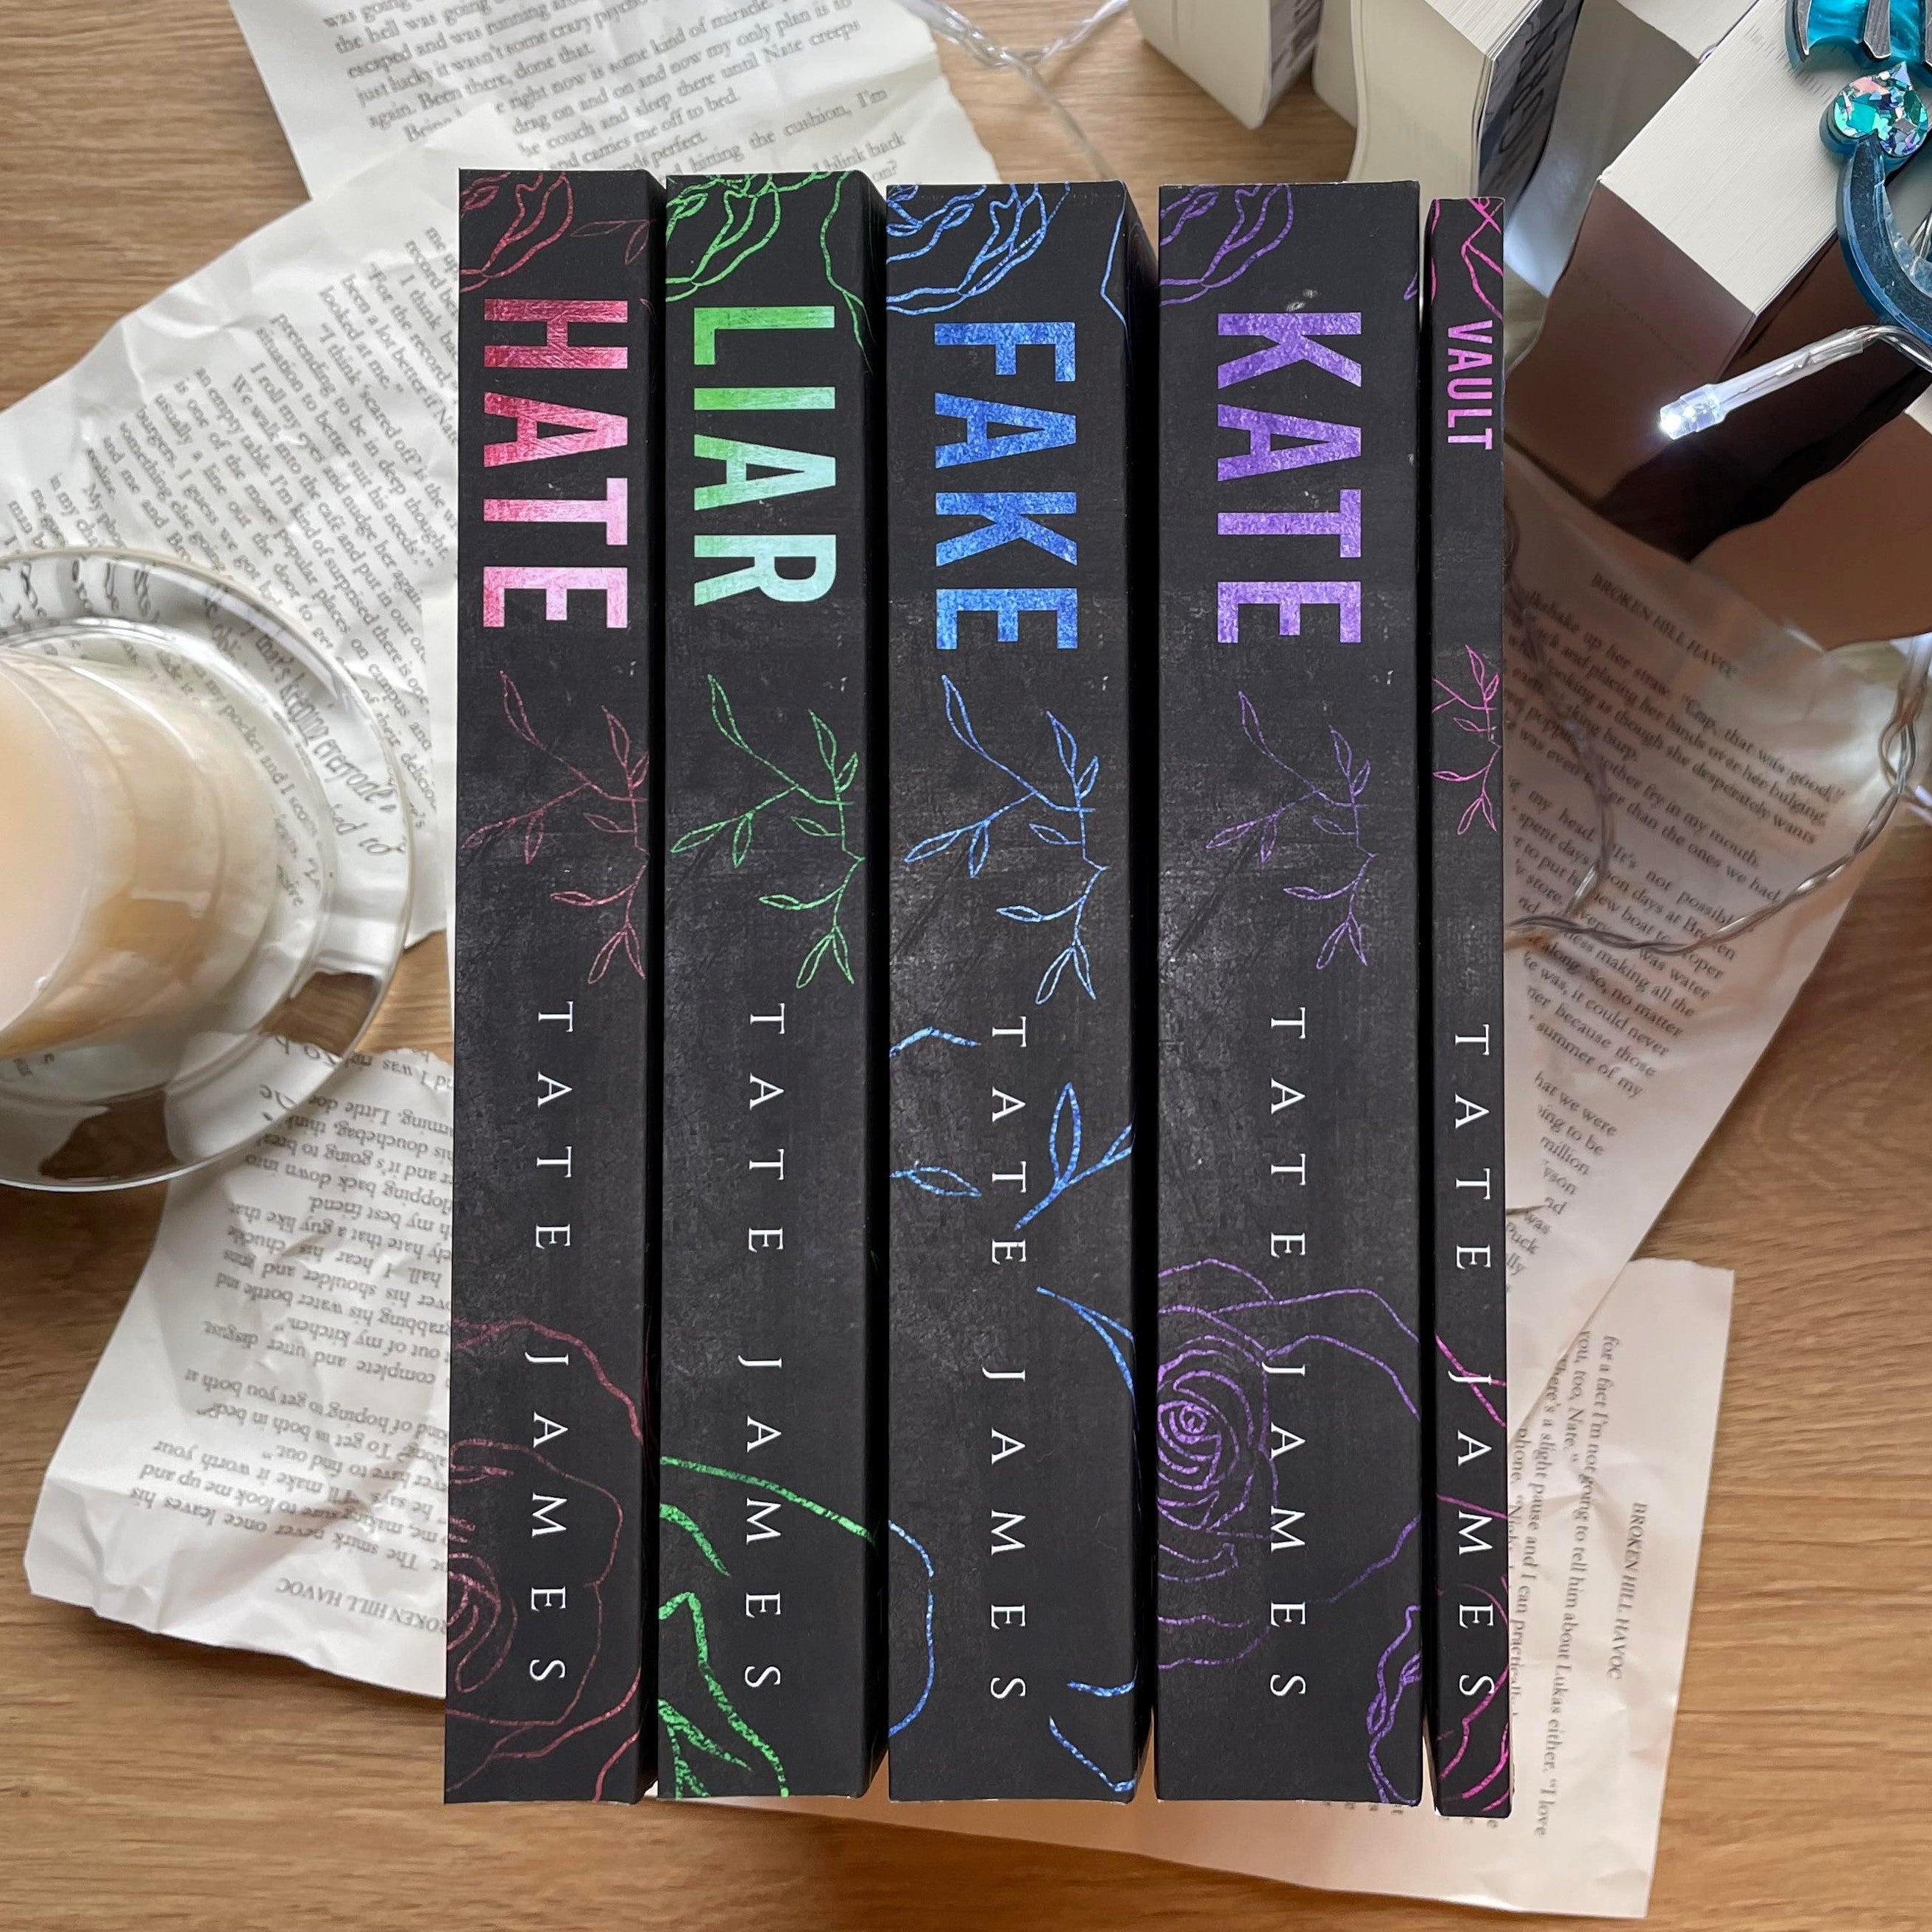 Madison Kate: Alternate Covers by Tate James